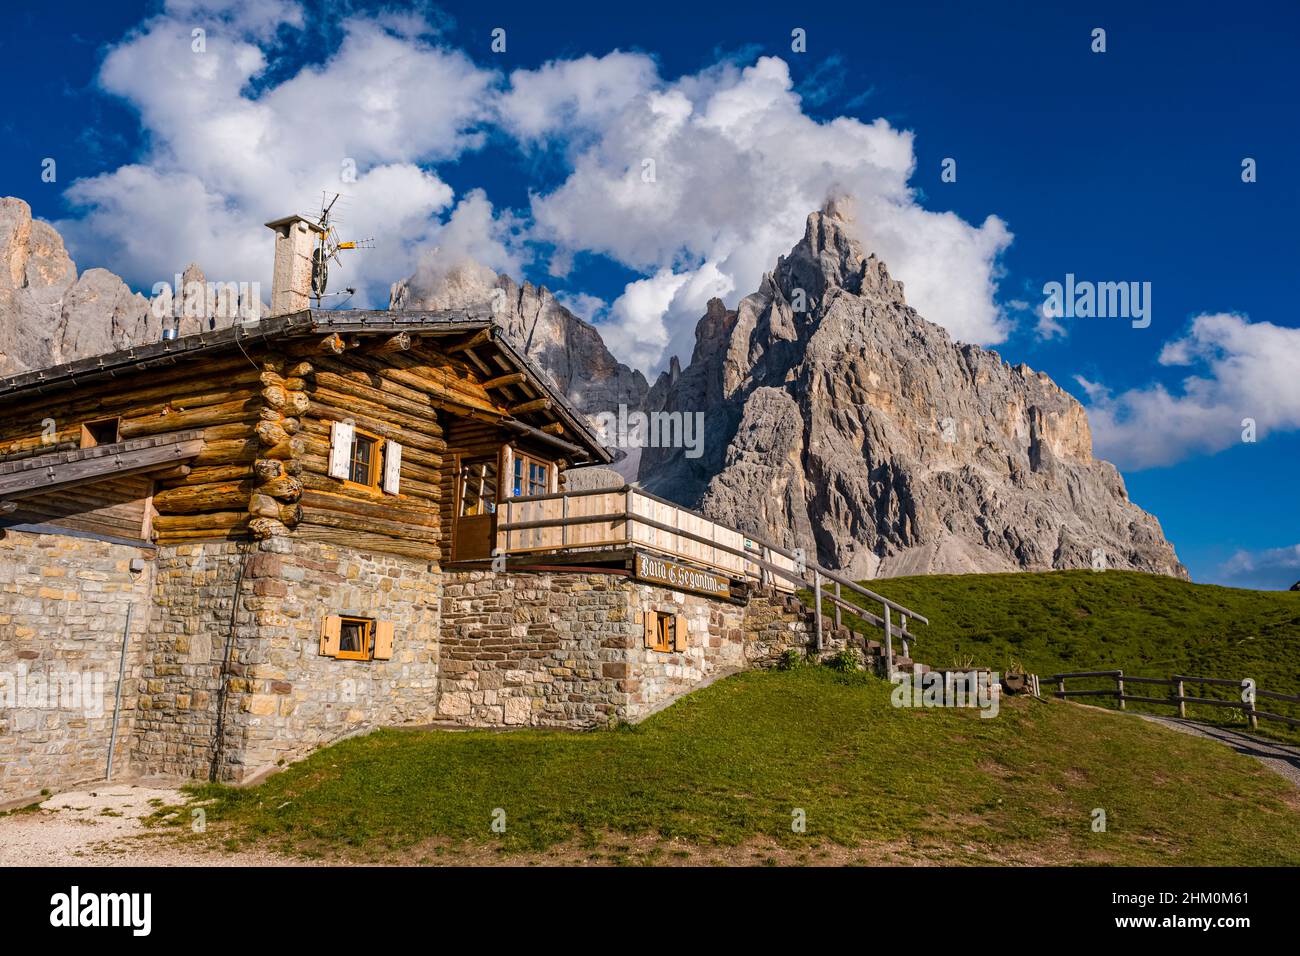 Baita Segantini, an alpine hut, with summits and rock faces of the Pala group, Cimon della Pala, one of the main summits, standing out, in the distanc Stock Photo